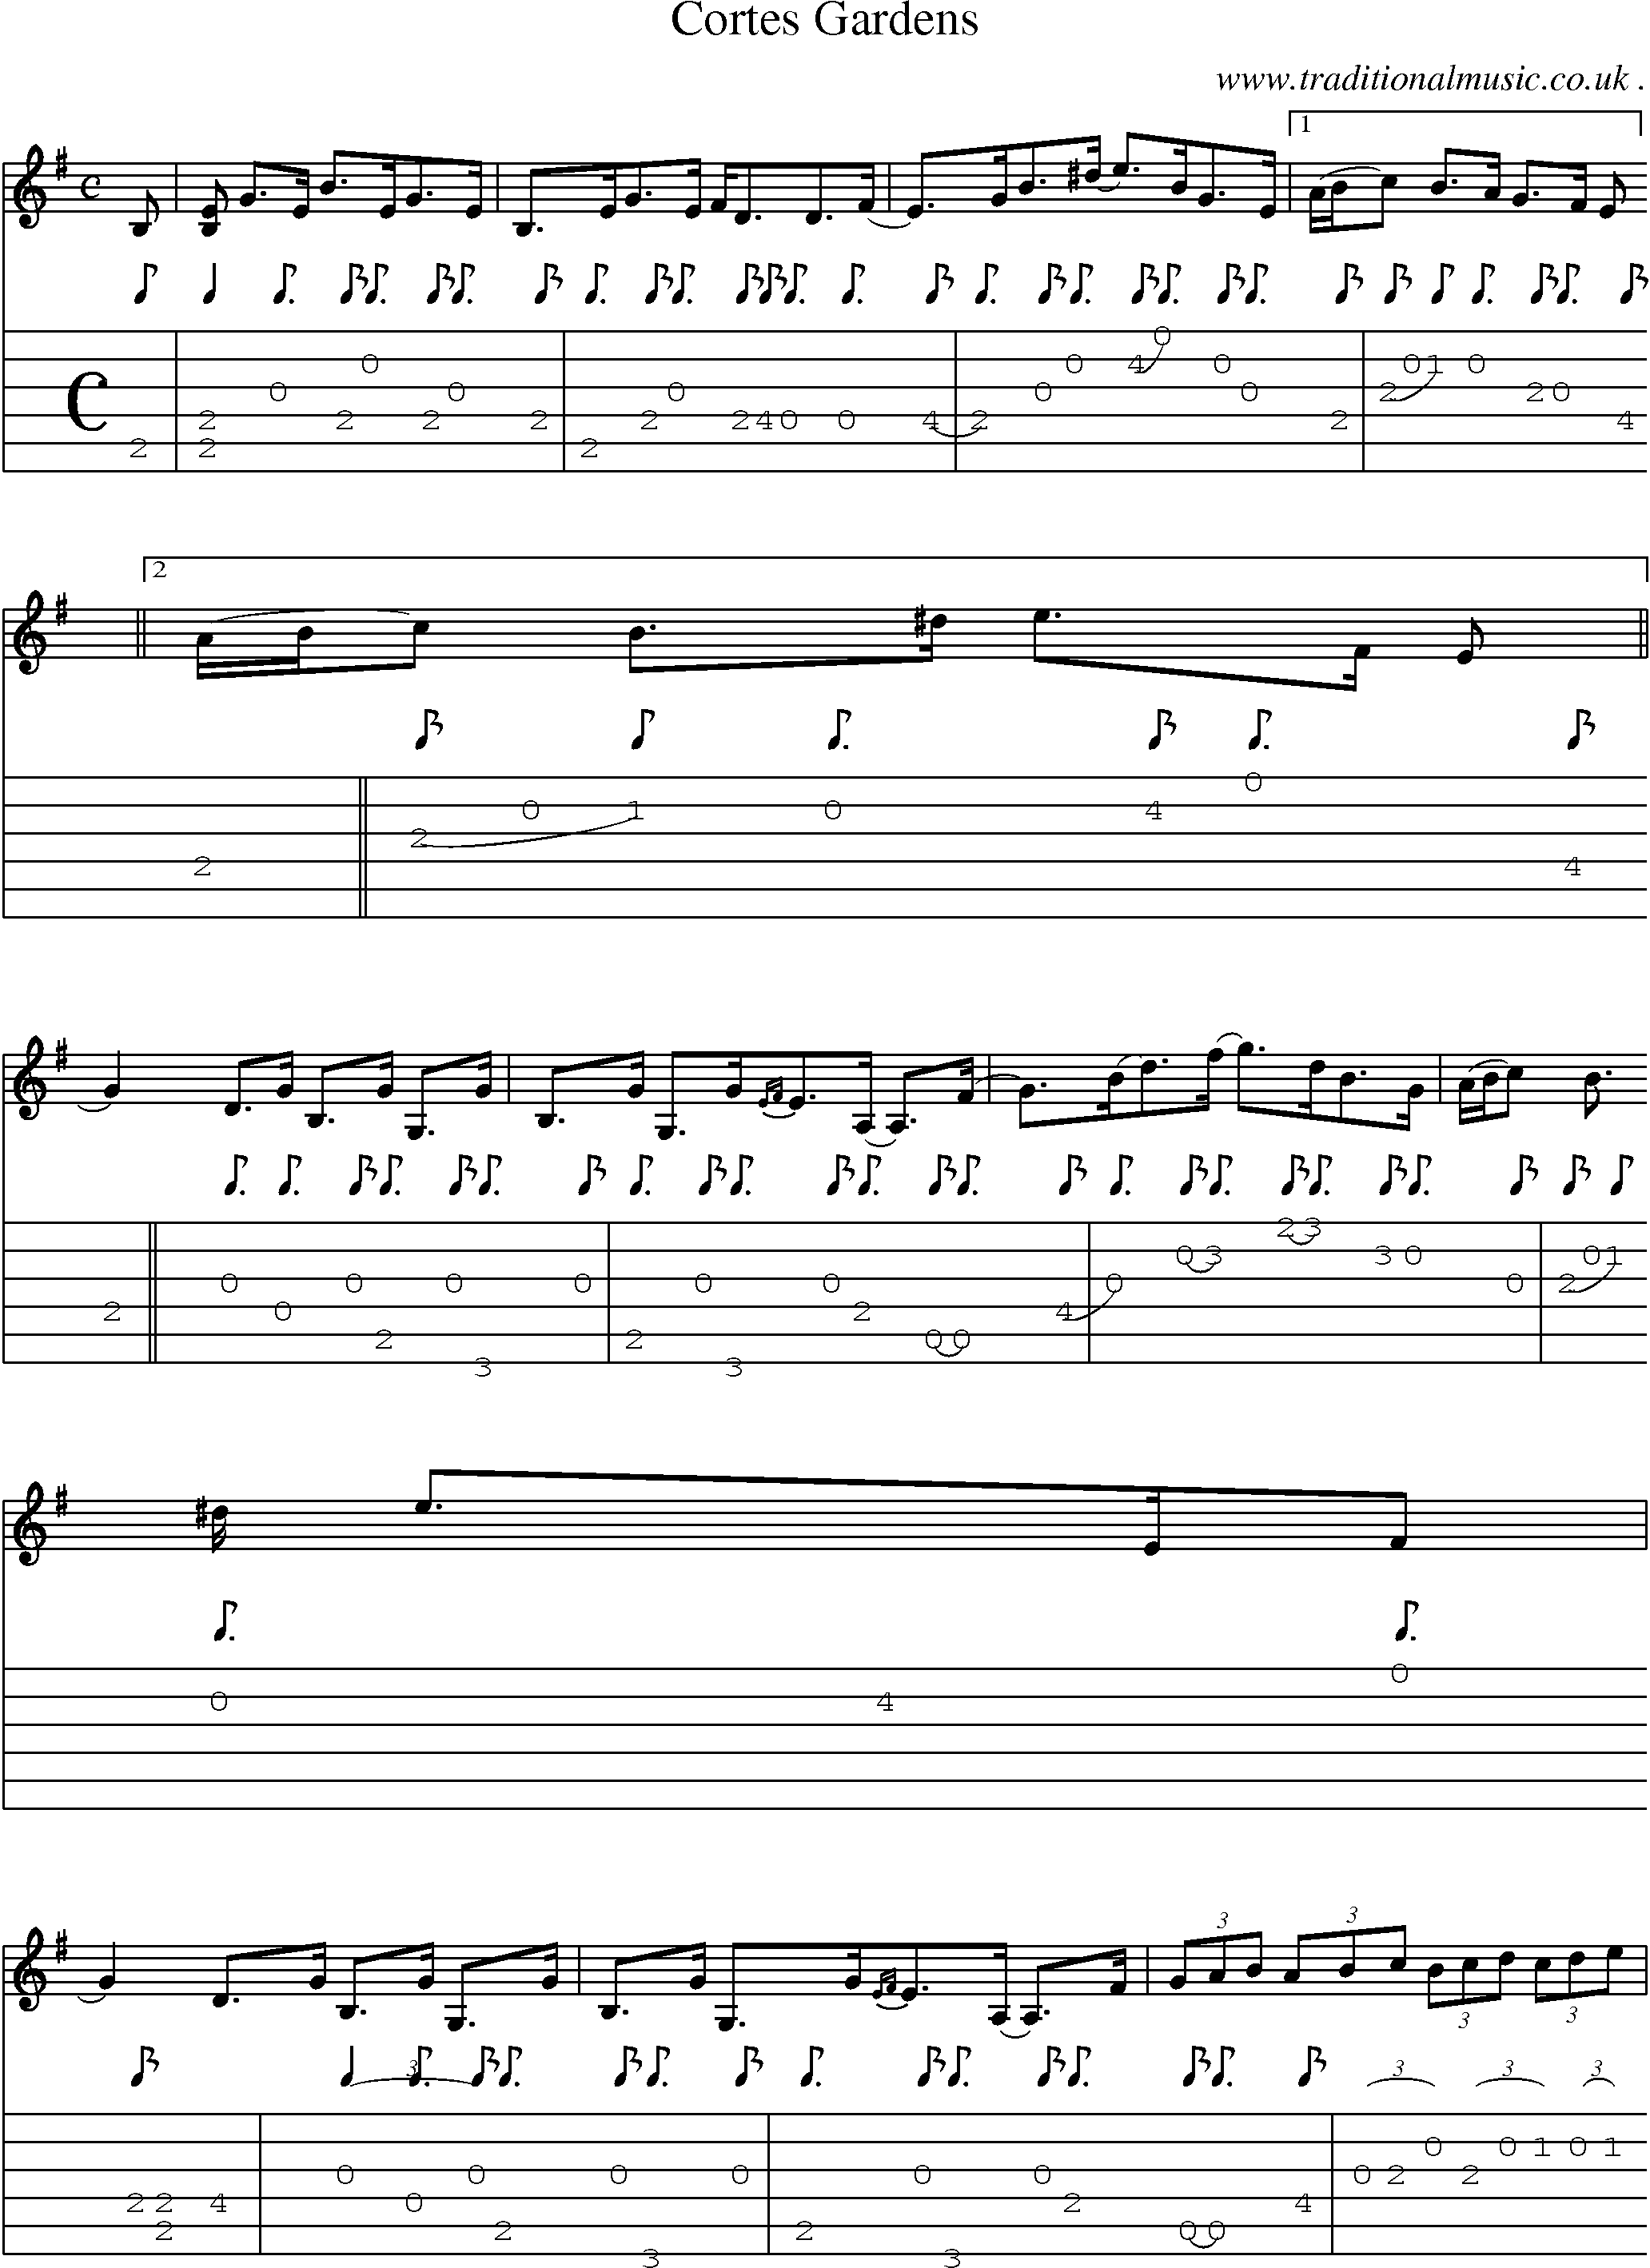 Sheet-music  score, Chords and Guitar Tabs for Cortes Gardens